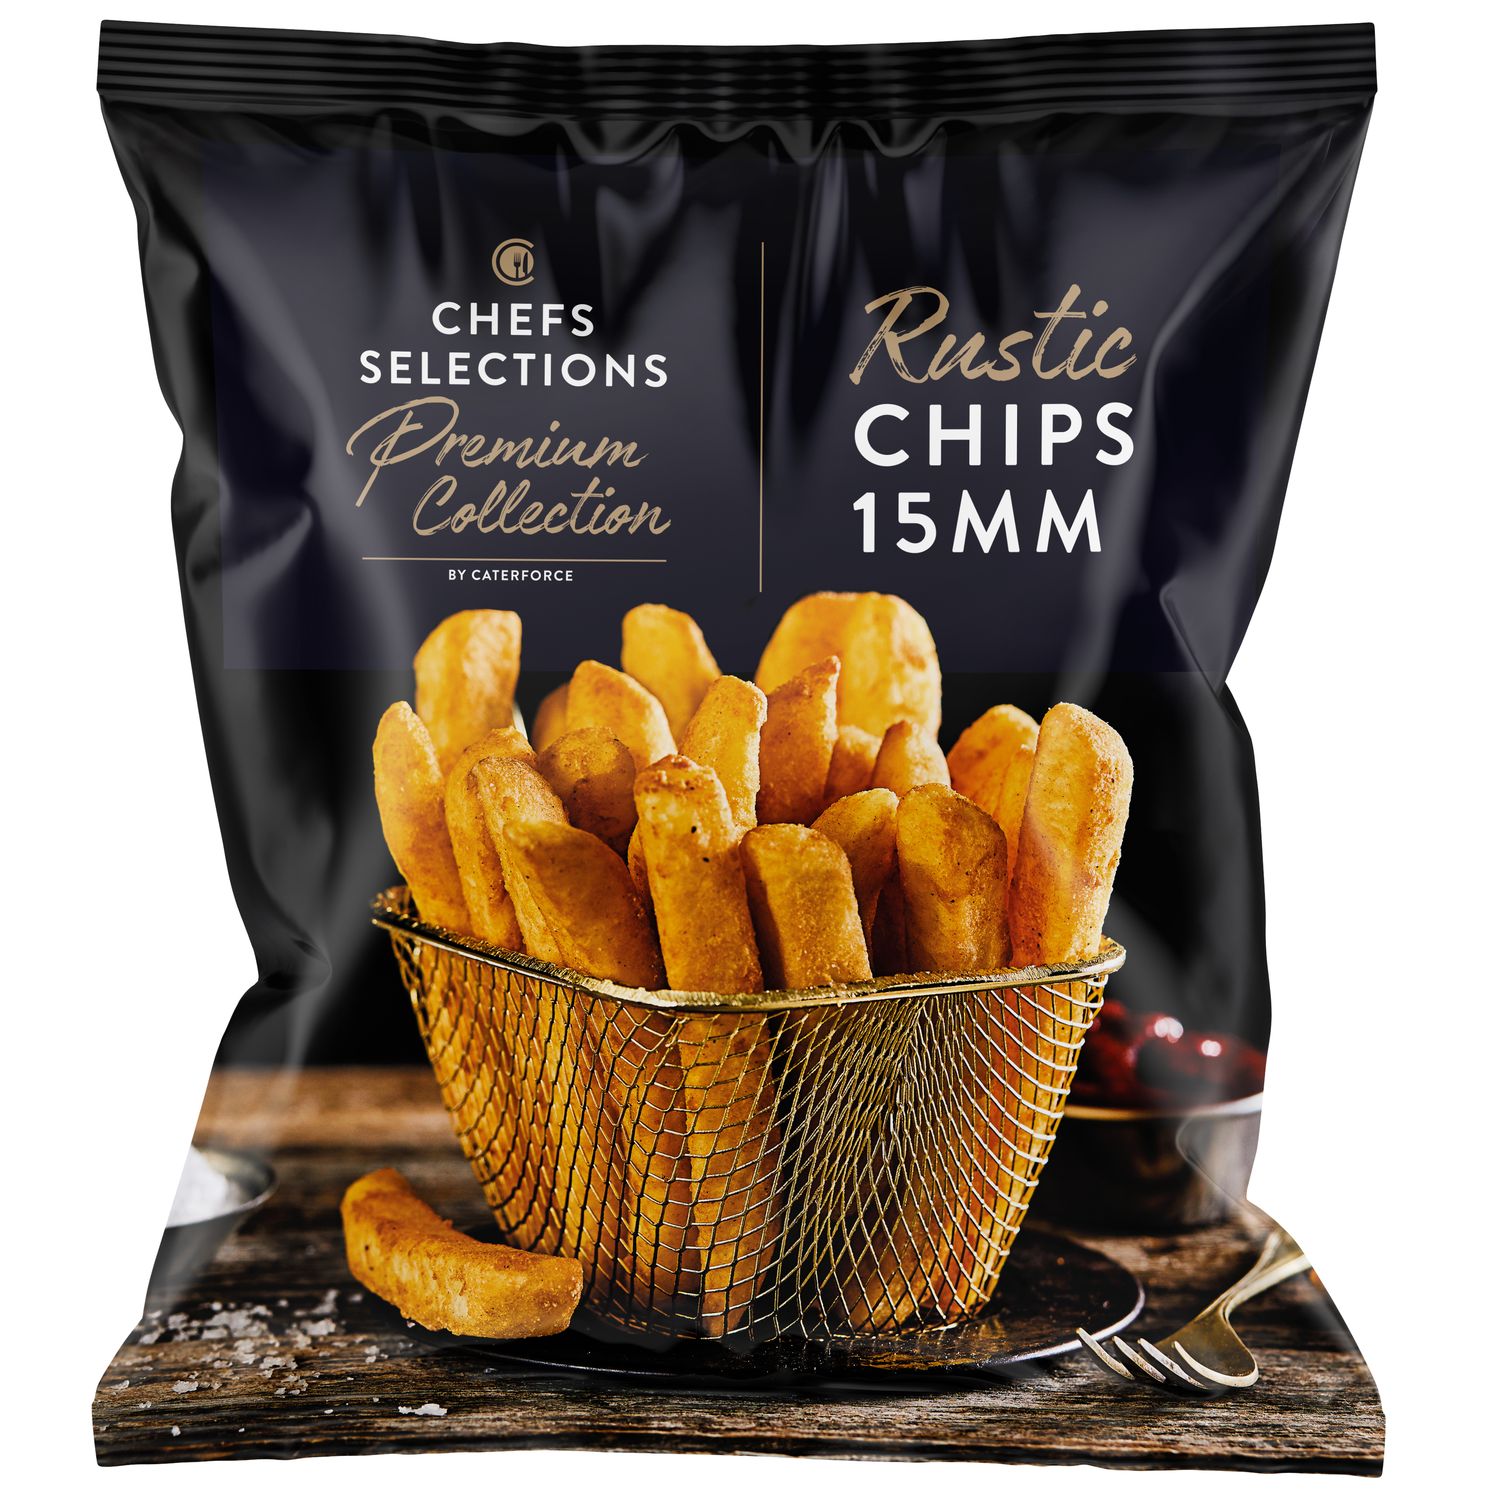 Chefs’ Selections Premium Rustic Chips 15mm (4 x 2.27kg)